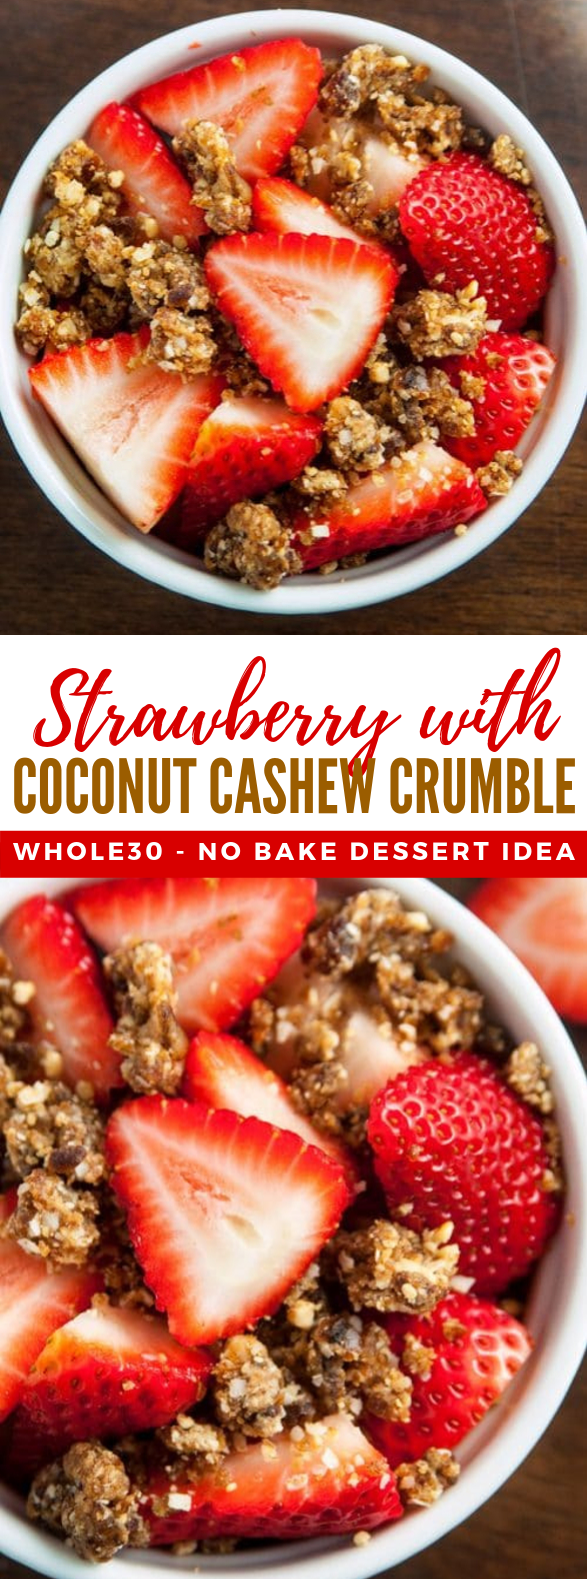 STRAWBERRIES WITH COCONUT CASHEW CRUMBLE  #desserts #whole30